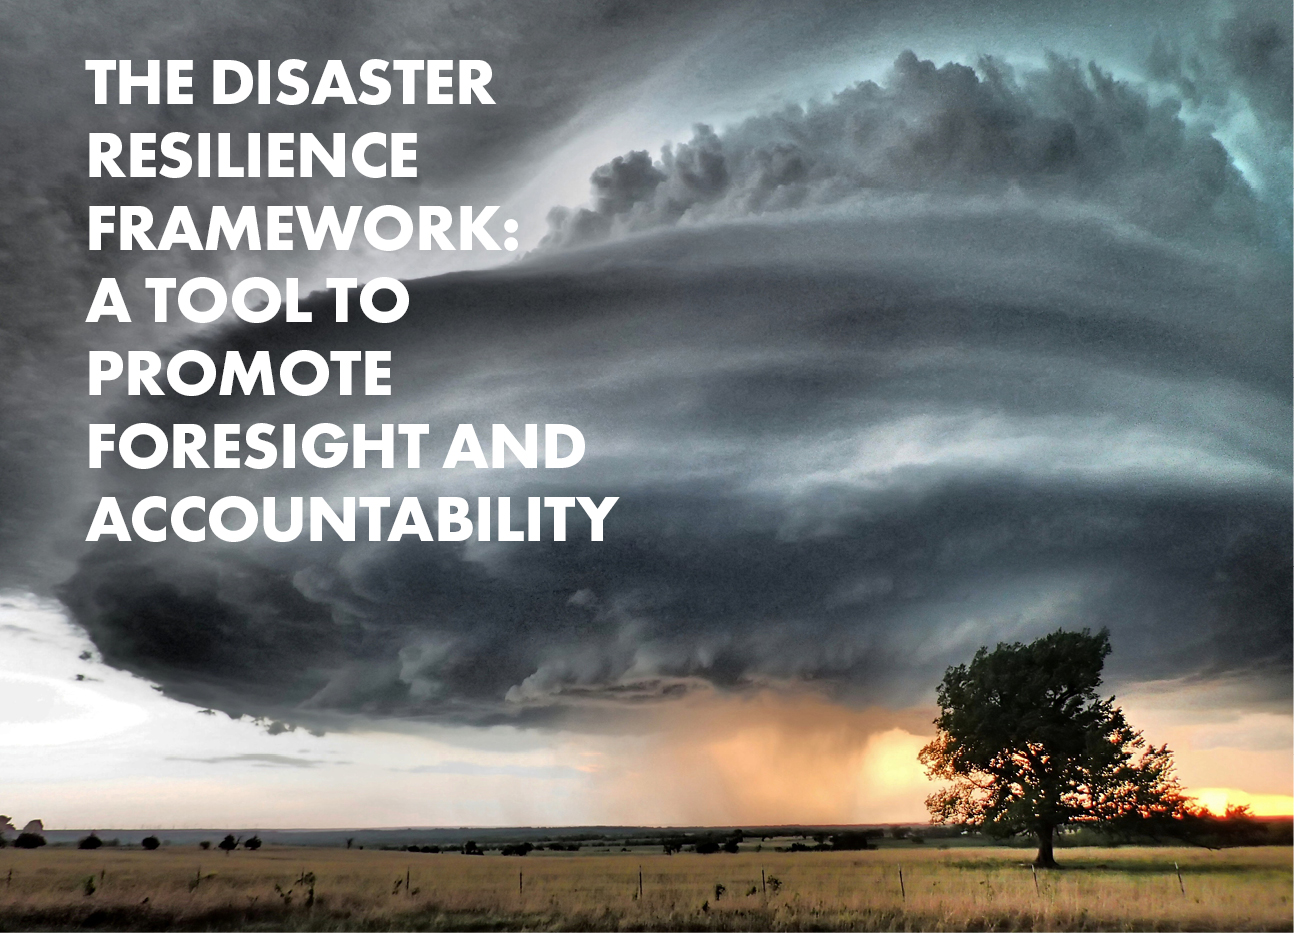 Graphic: The Disaster Resilience Framework: A Tool to Promote Foresight and Accountability